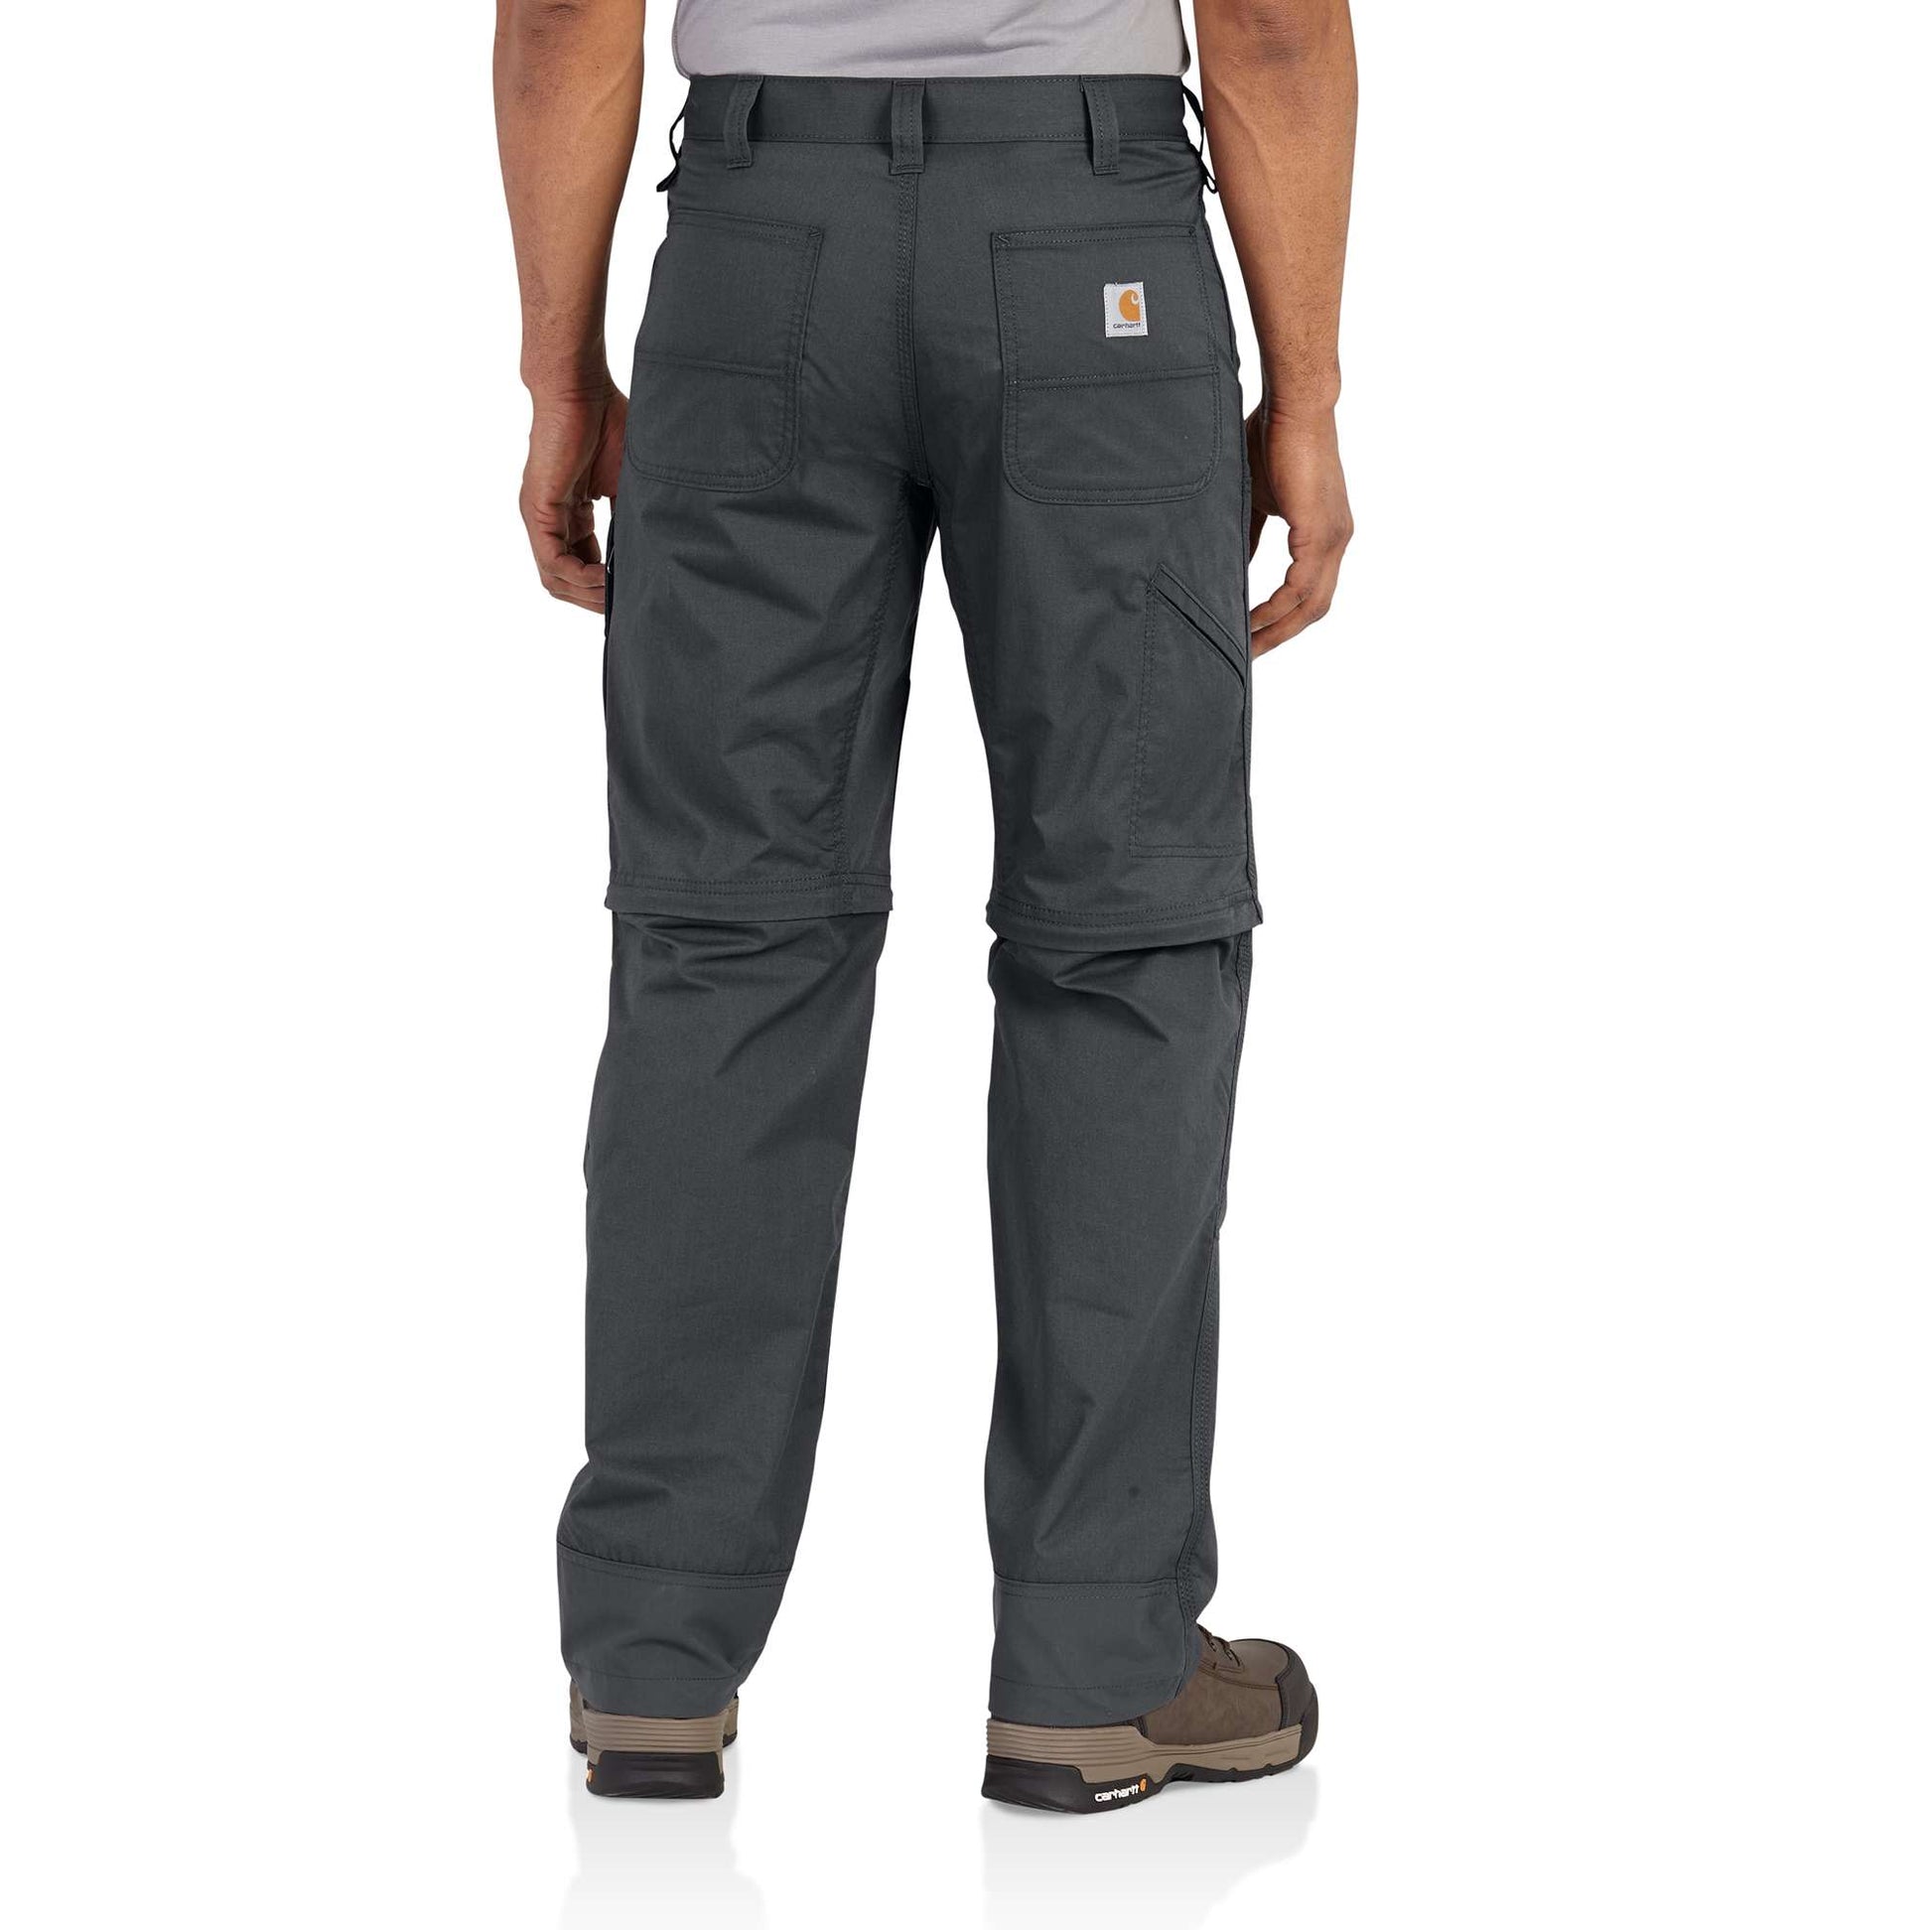 Carhartt Force Extremes Convertible Pant